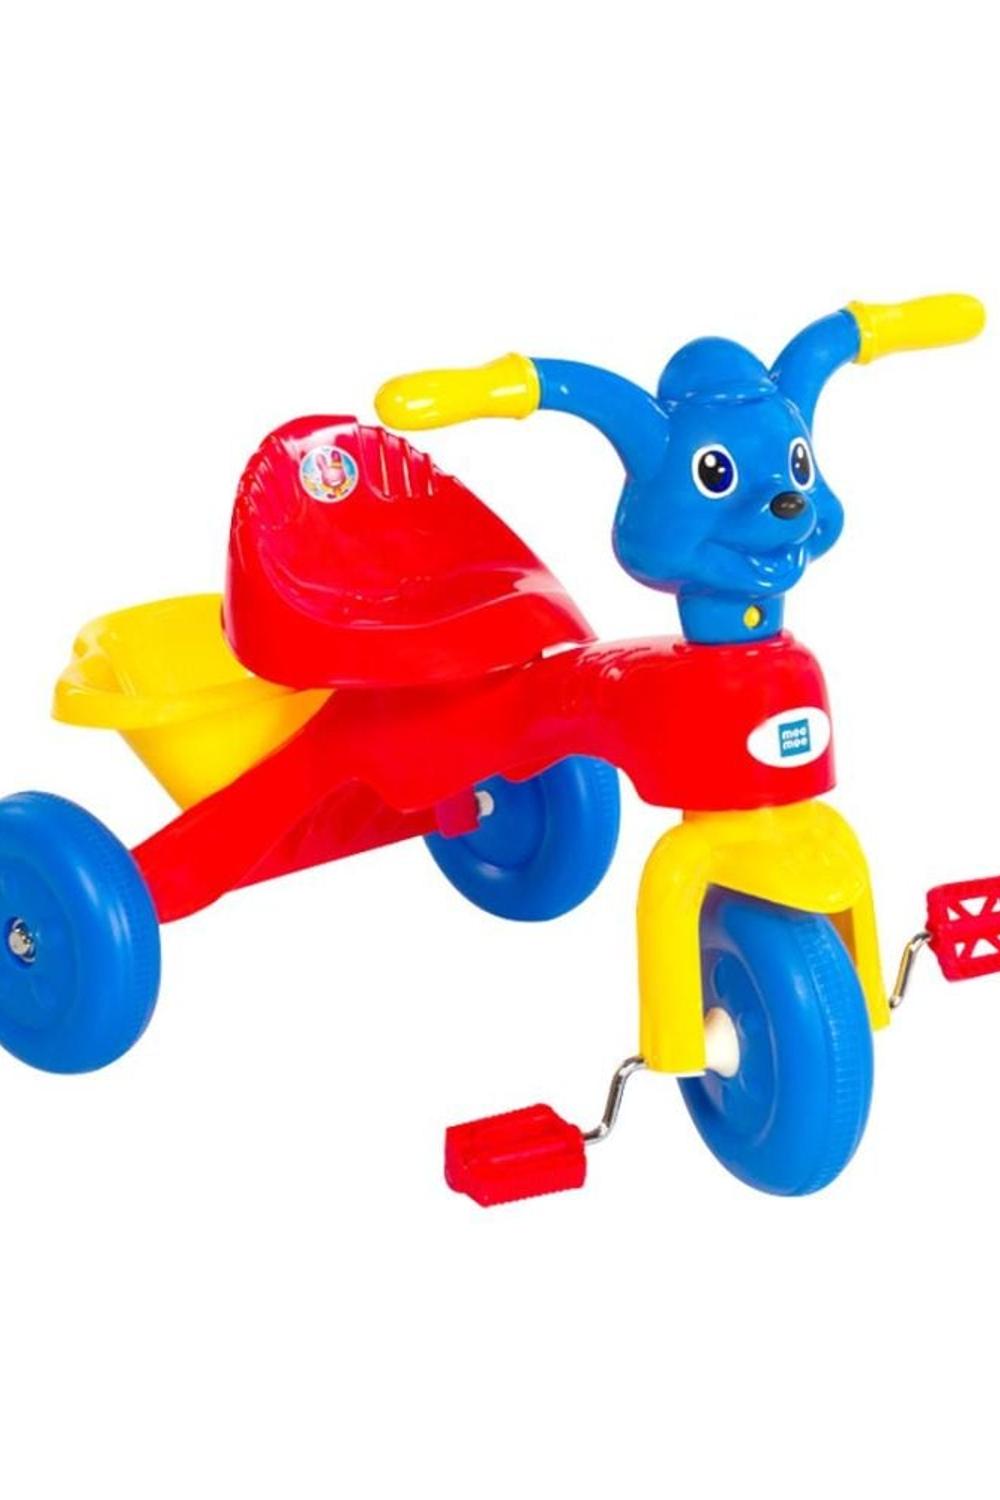 Mee Mee Easy to Ride Baby Tricycle